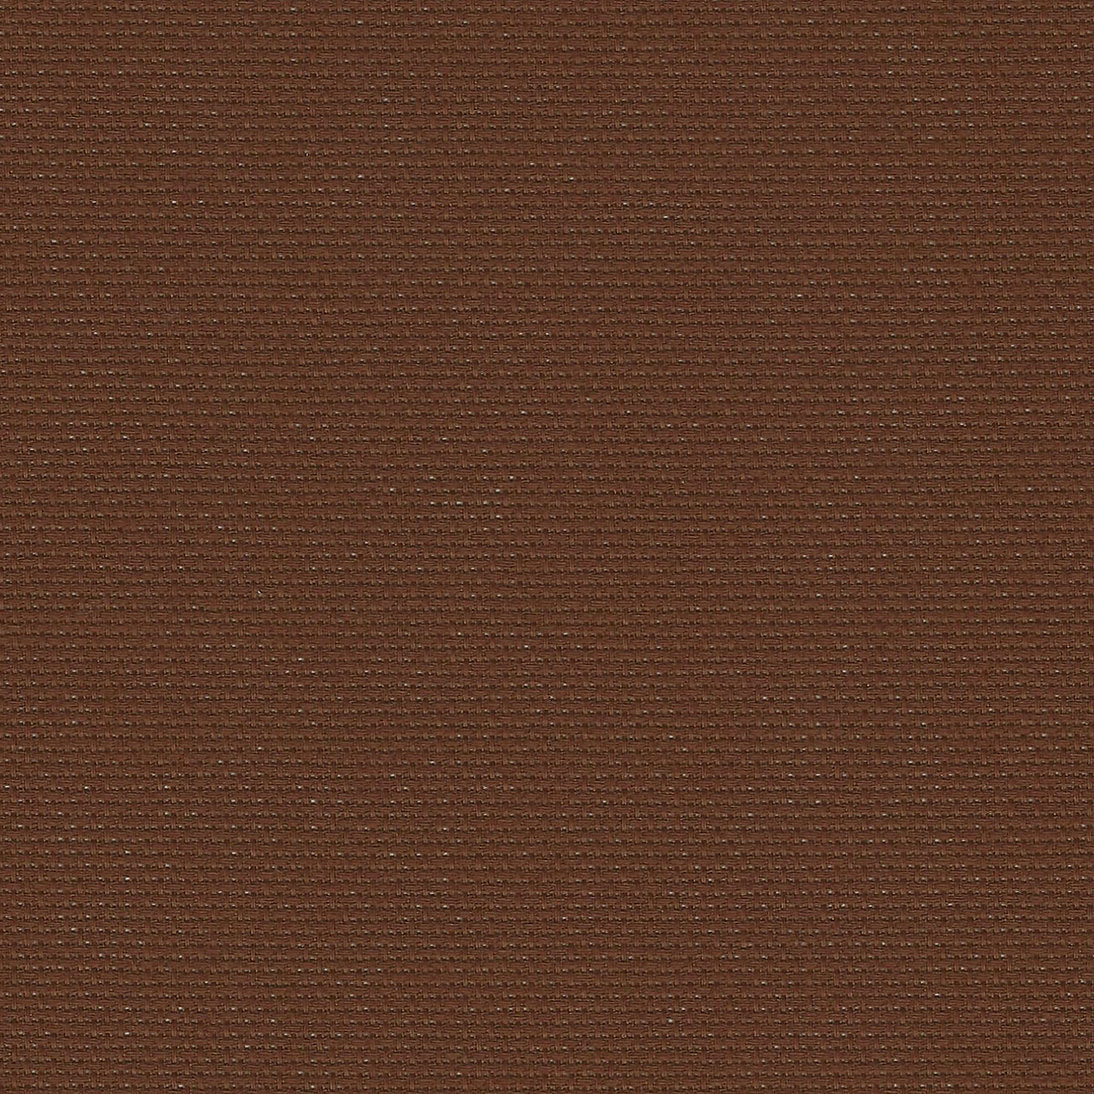 3793/9010 Fein-Aida fabric 18 ct. ZWEIGART Chestnut: Your High-Quality Canvas for Unforgettable Cross Stitch Creations